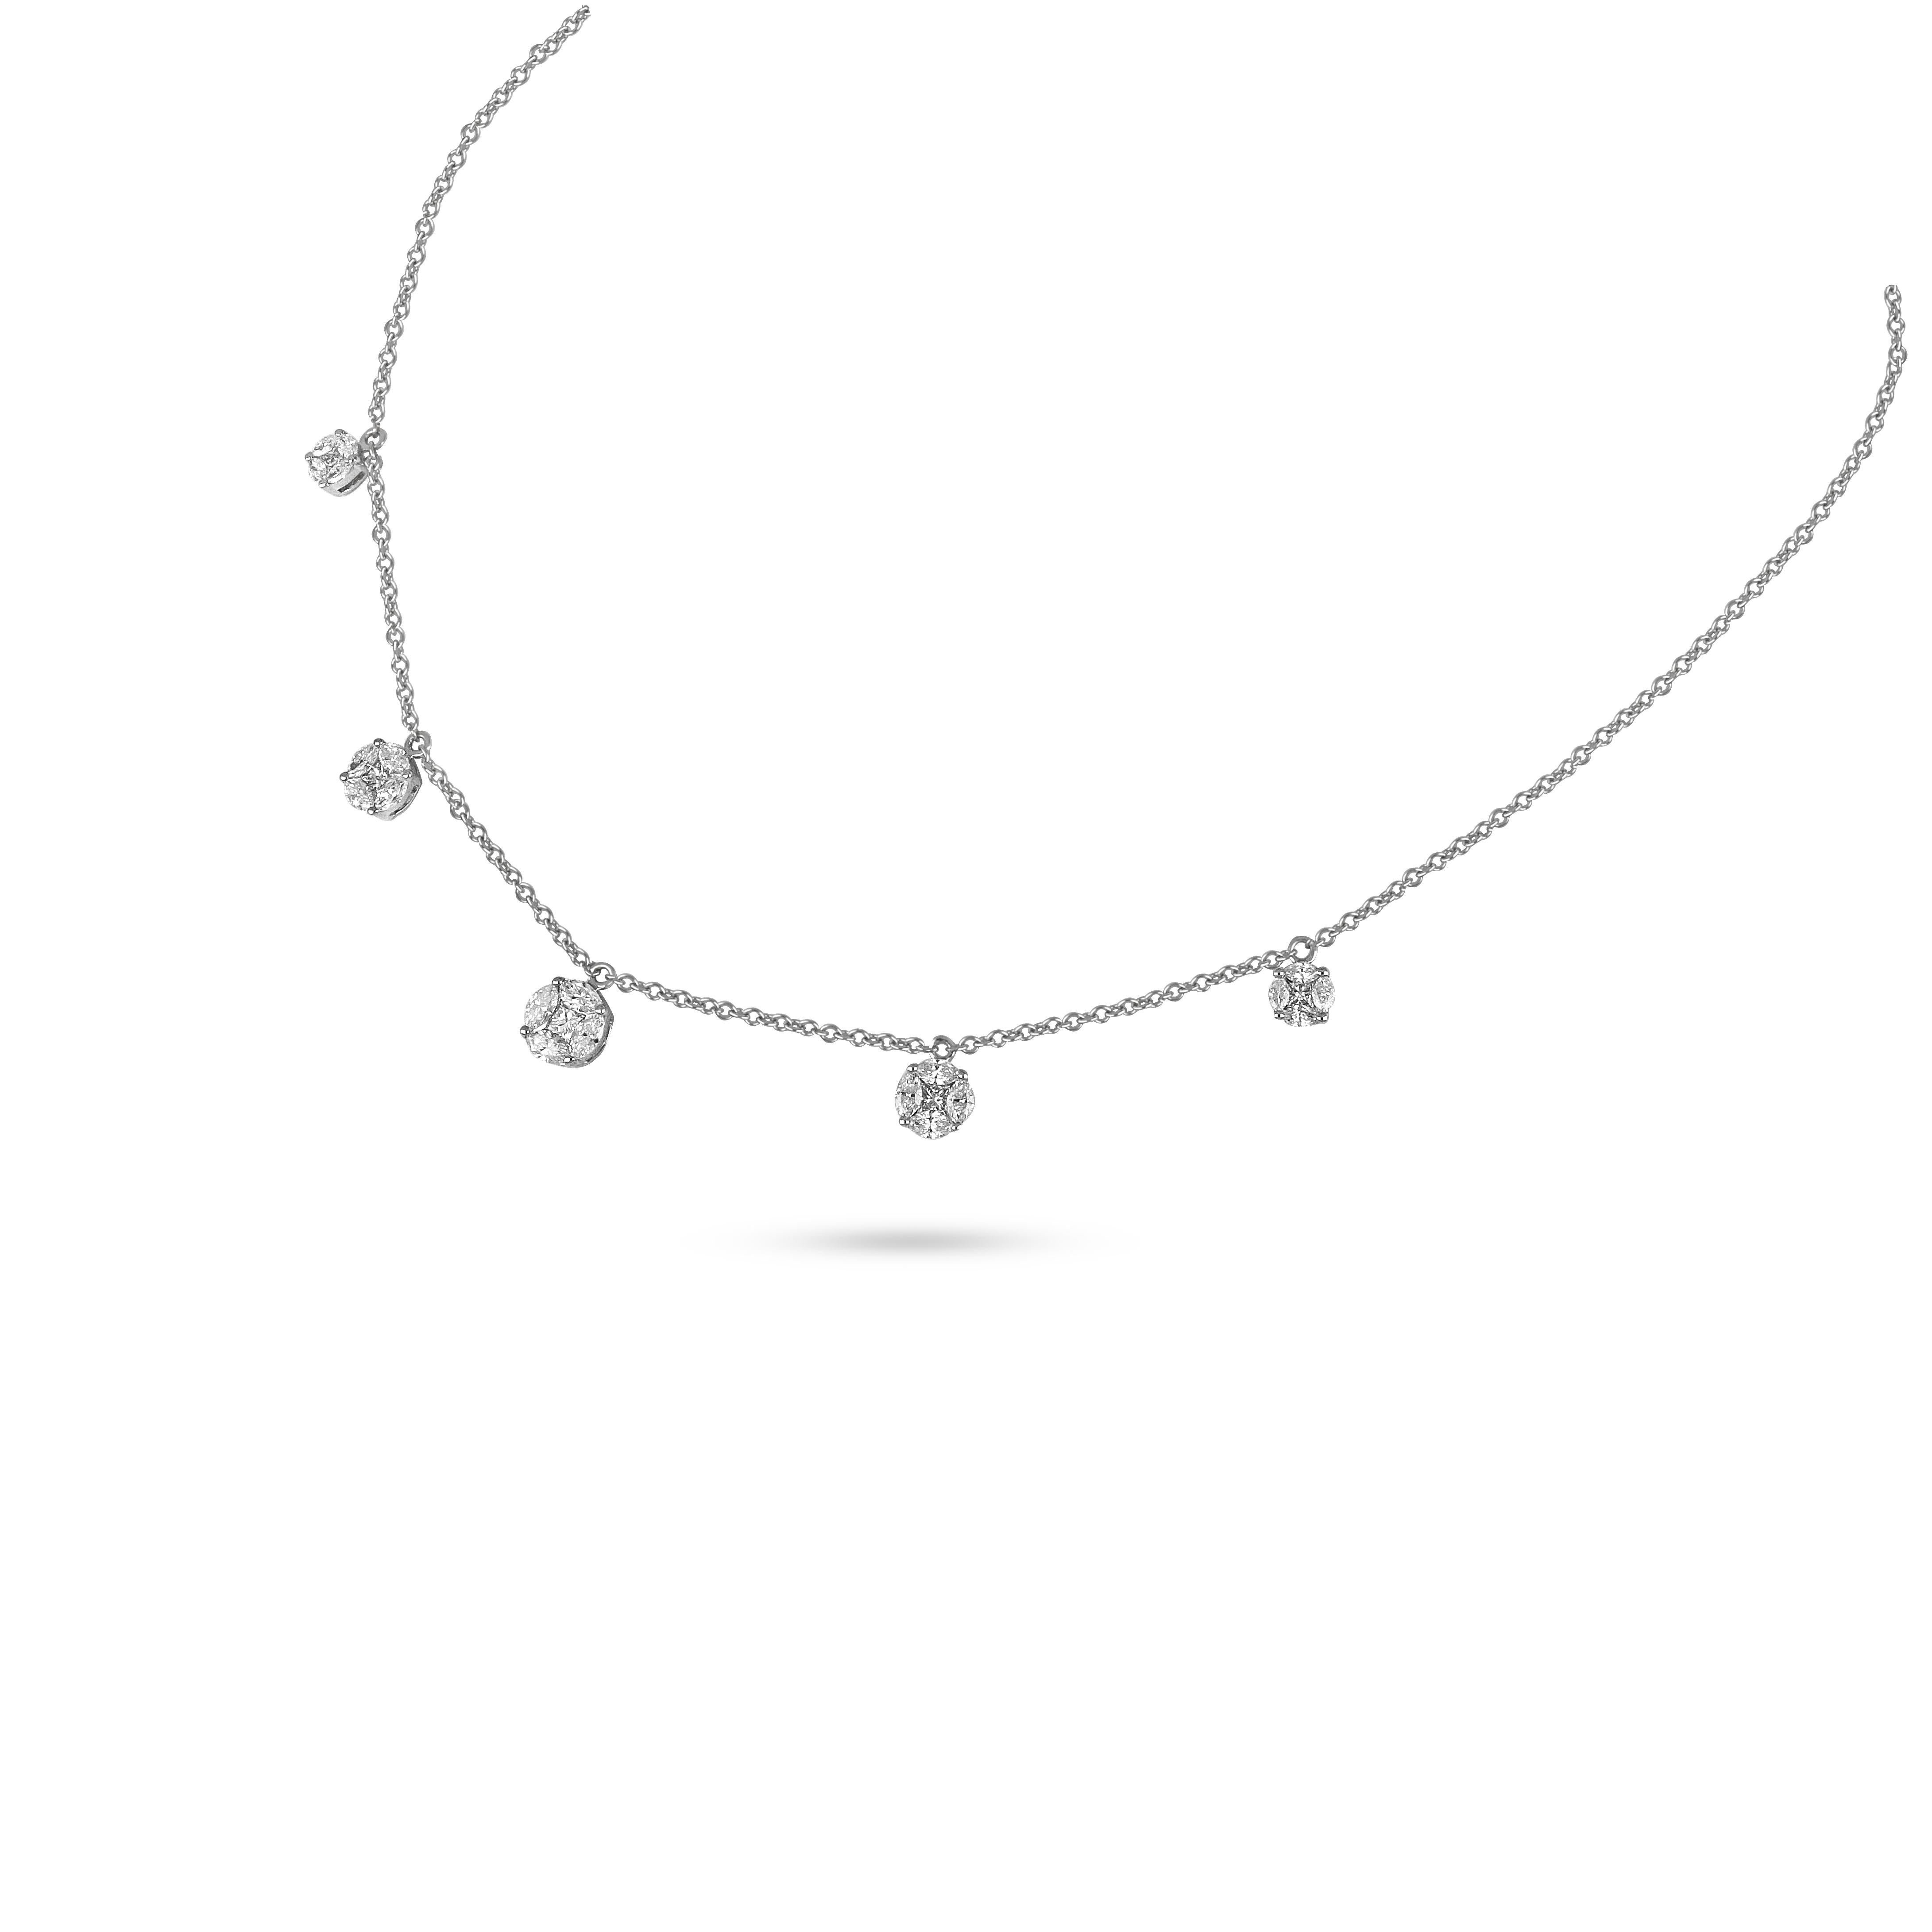 Designed for mixing, matching and stacking, this contemporary classis 5 drops diamond choker presented on a delicate 18 karat white gold chain catches and reflects the light with the elegant details of the marquise and princess cut diamonds. 
18